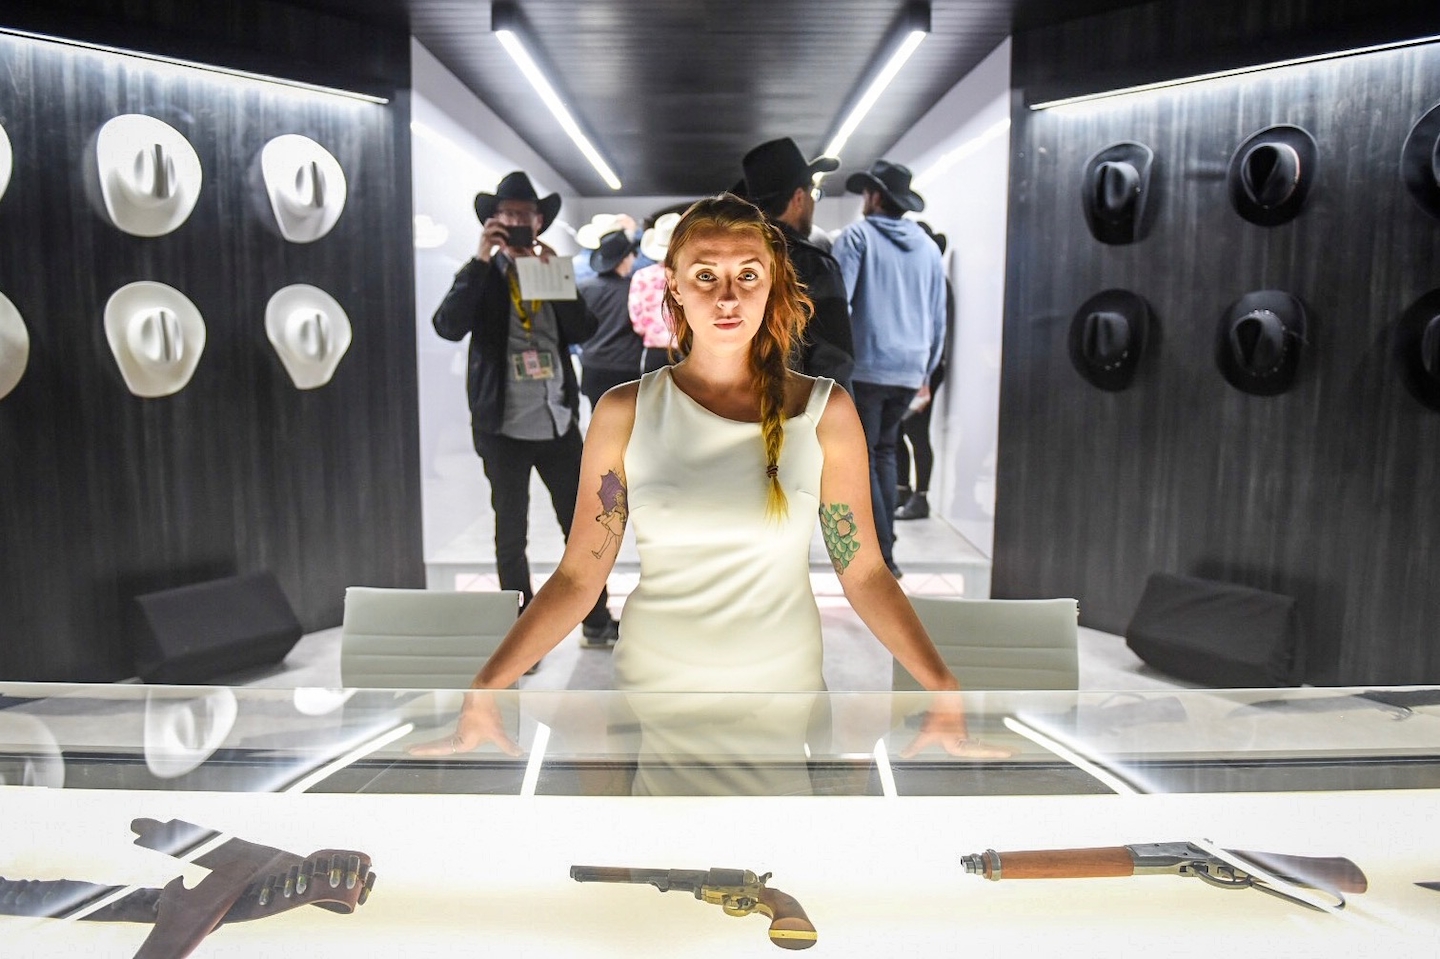 The HBO series Westworld has been brought to life at SXSW with the “Live Without Limits Weekend.” The last day is Sunday, March 11.